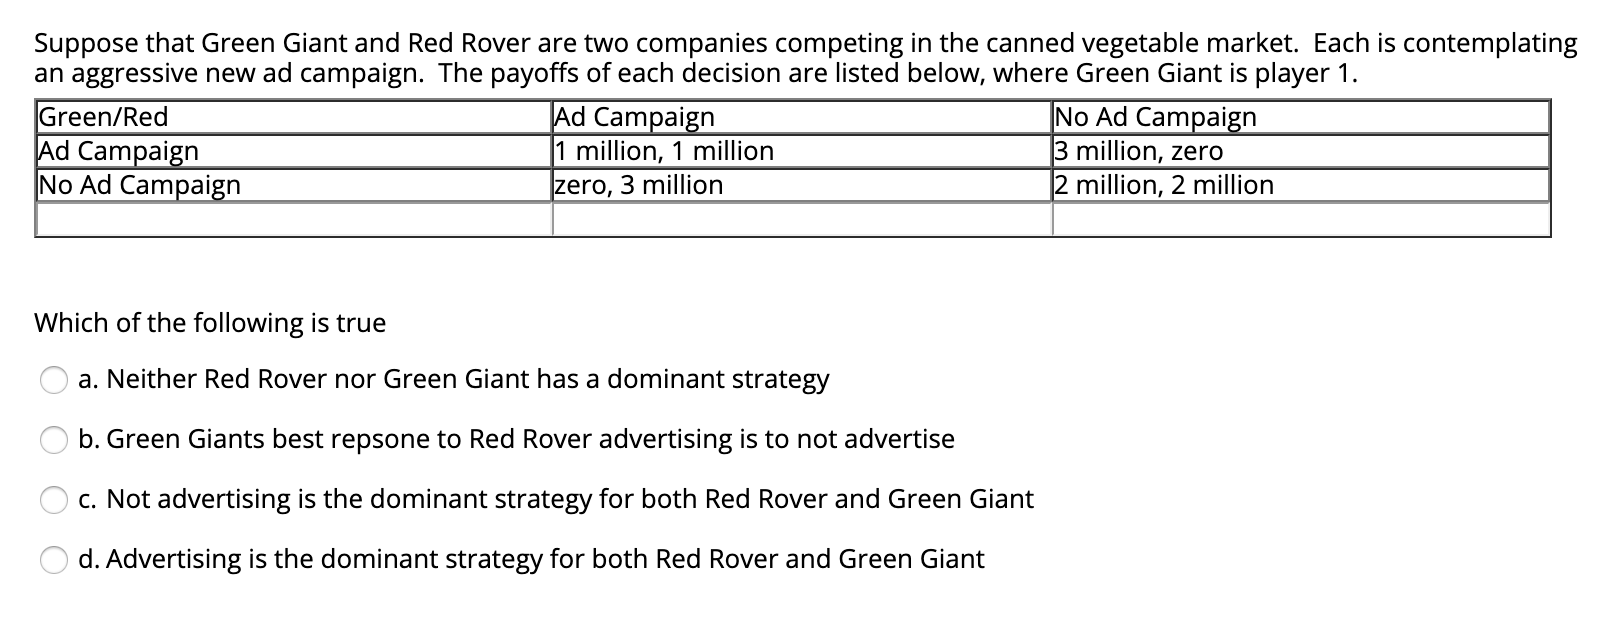 Suppose that Green Giant and Red Rover are two companies competing in the canned vegetable market. Each is contemplating
Green/Red
Ad Campaign
No Ad Campaign
an aggressive new ad campaign. The payoffs of each decision are listed below, where Green Giant is player 1.
Ad Campaign
1 million, 1 million
|No Ad Campaign
3 million, zero
2 million, 2 million
zero, 3 million
Which of the following is true
a. Neither Red Rover nor Green Giant has a dominant strategy
b. Green Giants best repsone to Red Rover advertising is to not advertise
c. Not advertising is the dominant strategy for both Red Rover and Green Giant
d. Advertising is the dominant strategy for both Red Rover and Green Giant
